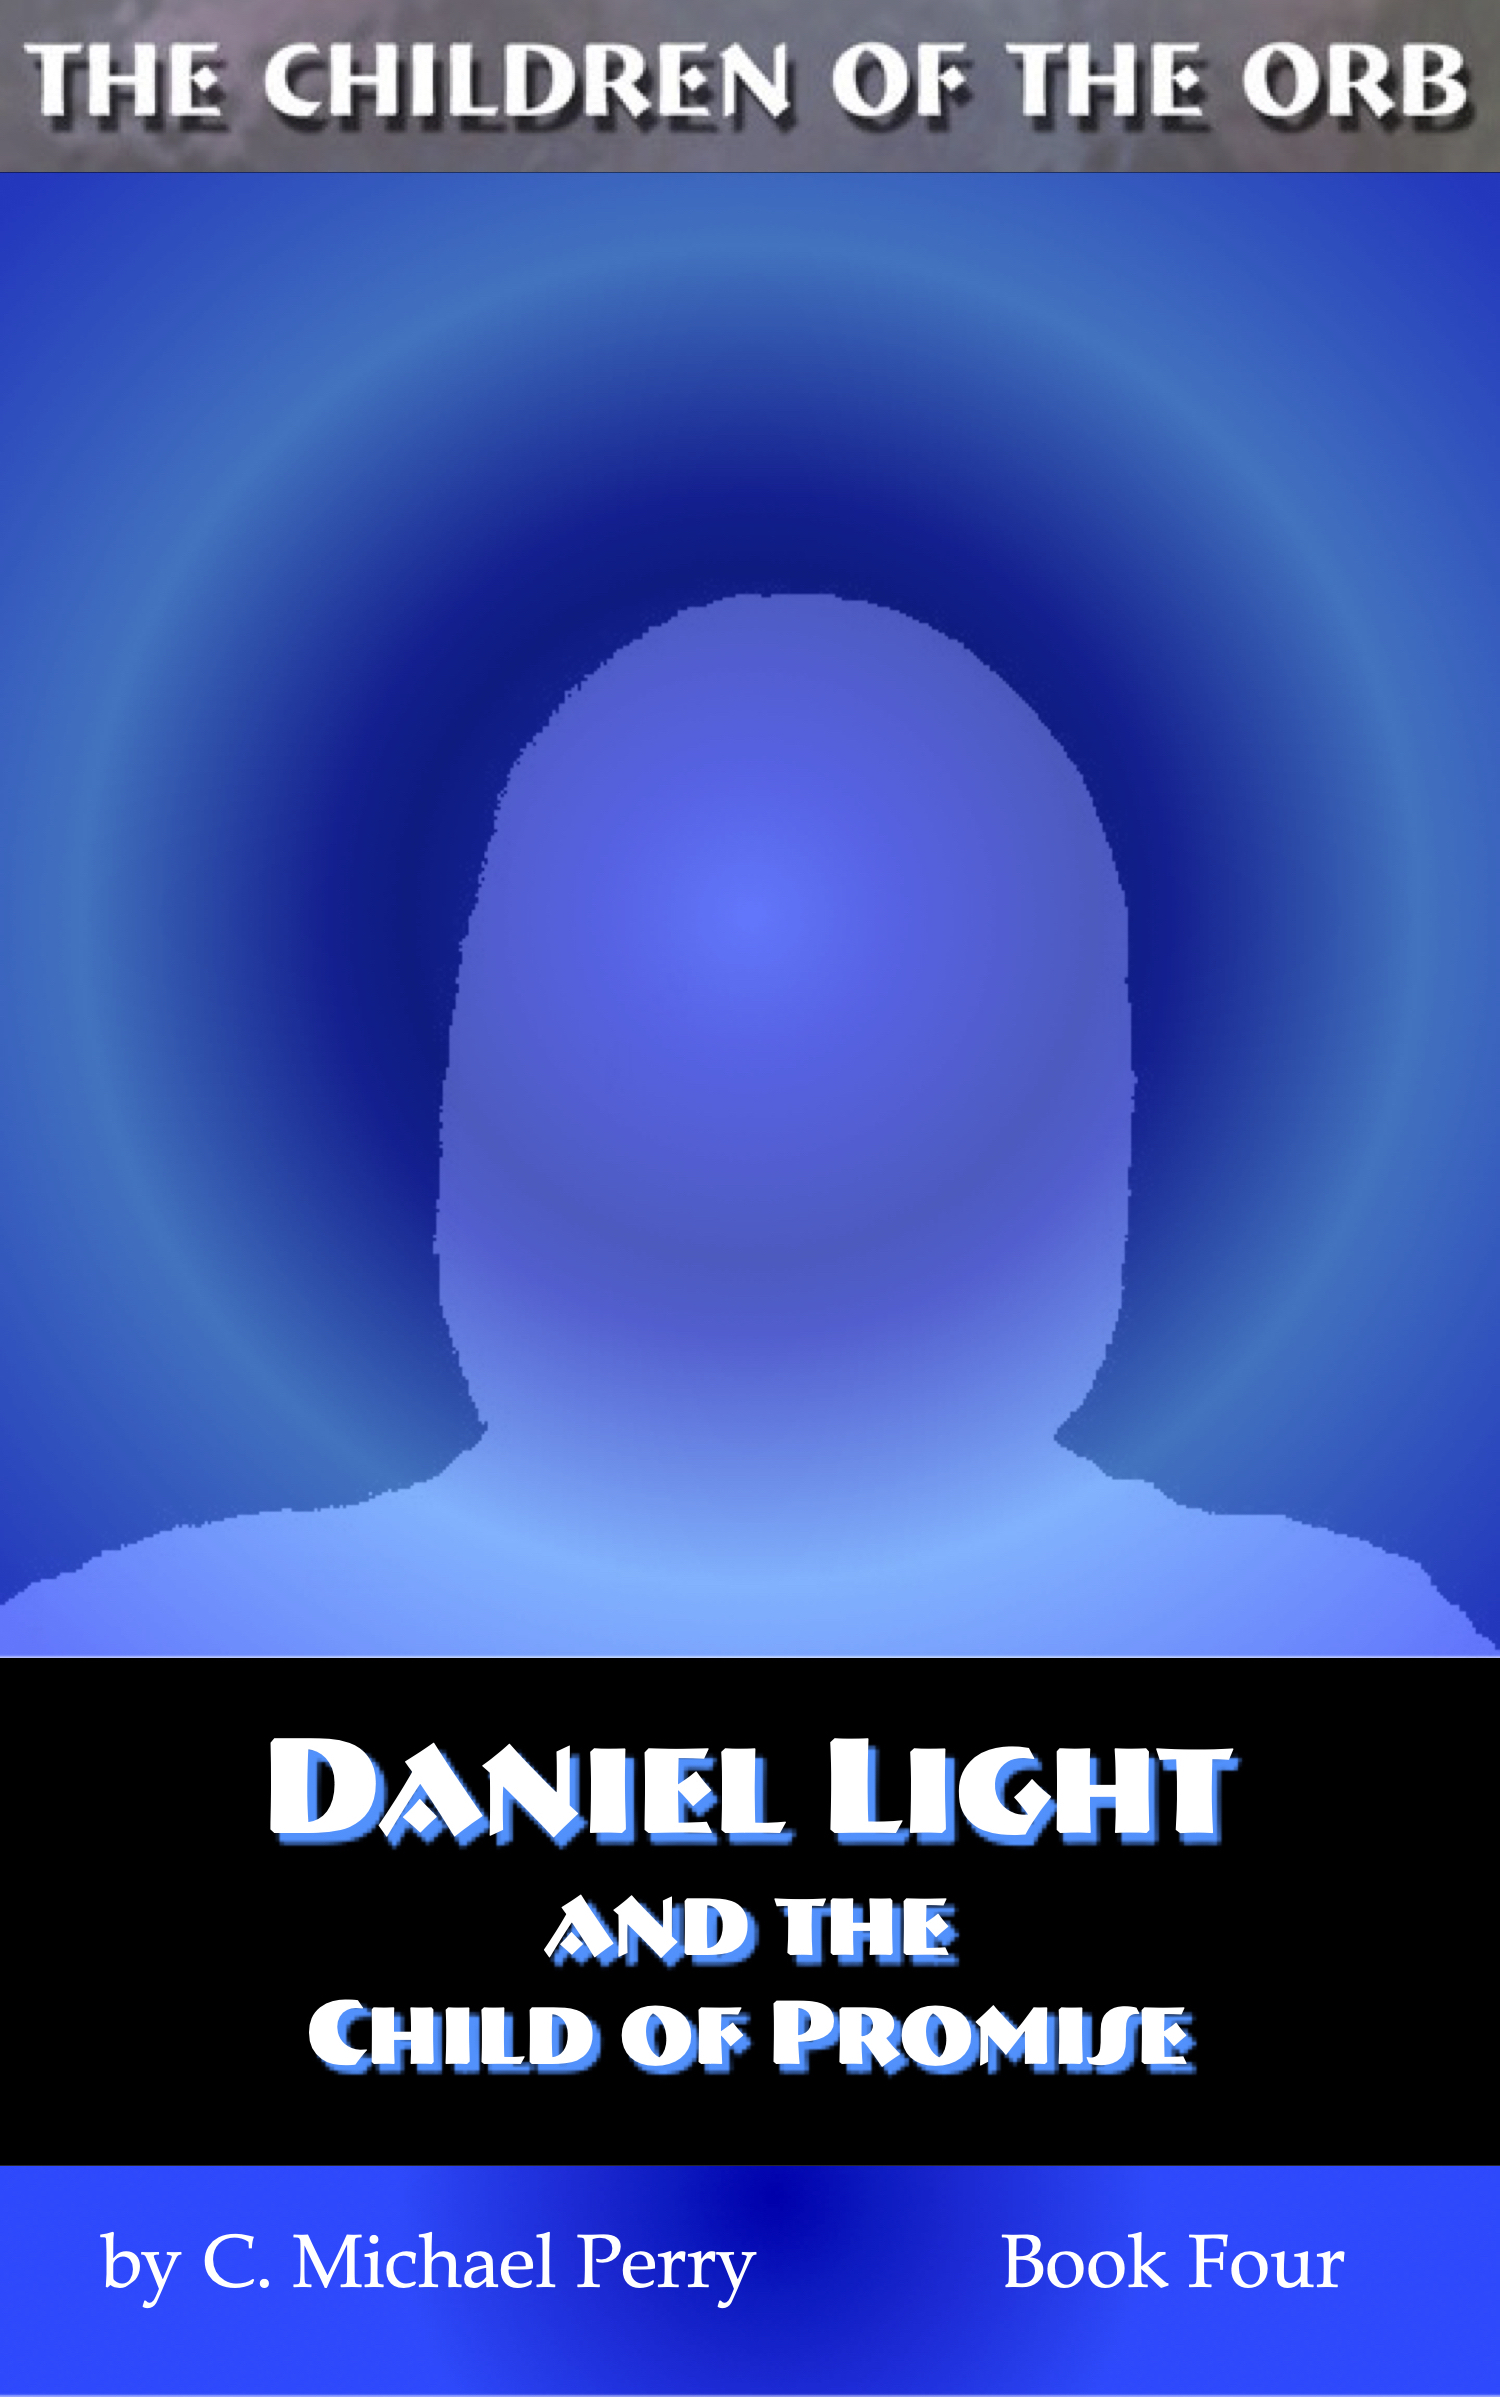 Daniel Light and the Child of Promise — Book 4